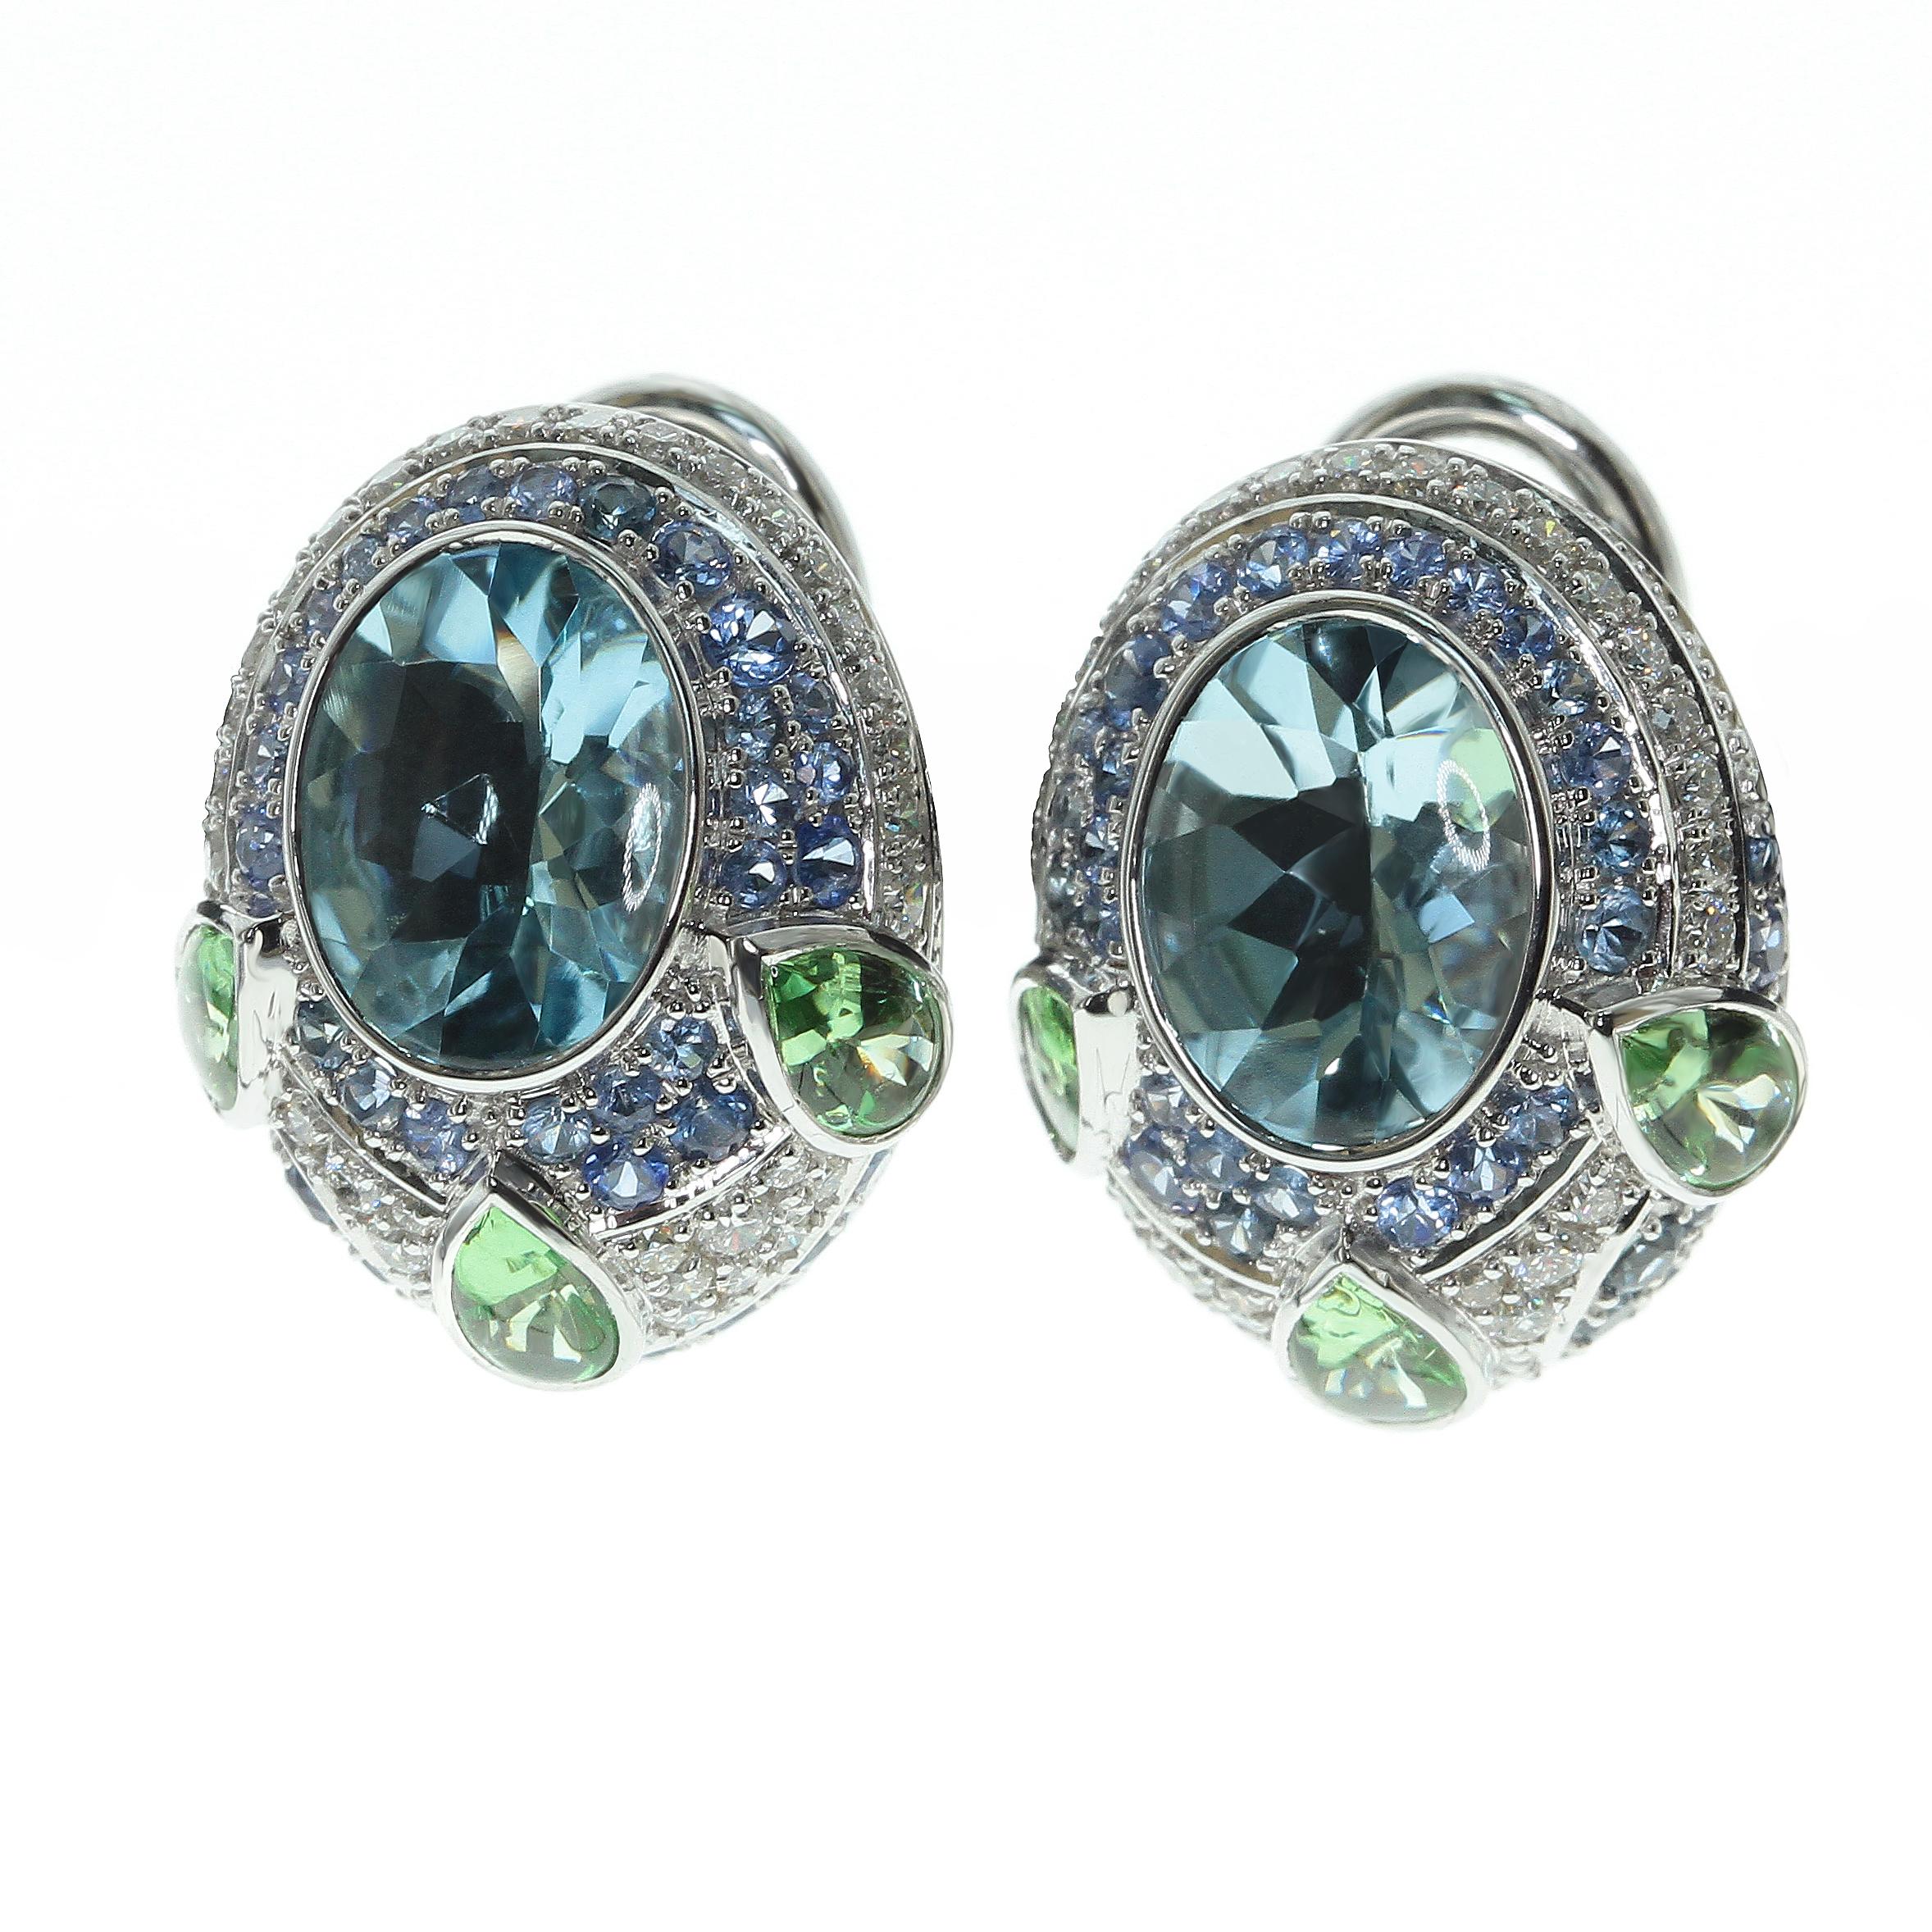 Aquamarine Tsavorite Diamonds Sapphire 18 Karat White Gold Oriental Eairrngs 

Aquamarine have bufftop Oval cut, the crown is cabochon and pavilion is faceted.
This cut looks very vibrant with the Aquamarine, Tsavorites are supported the color